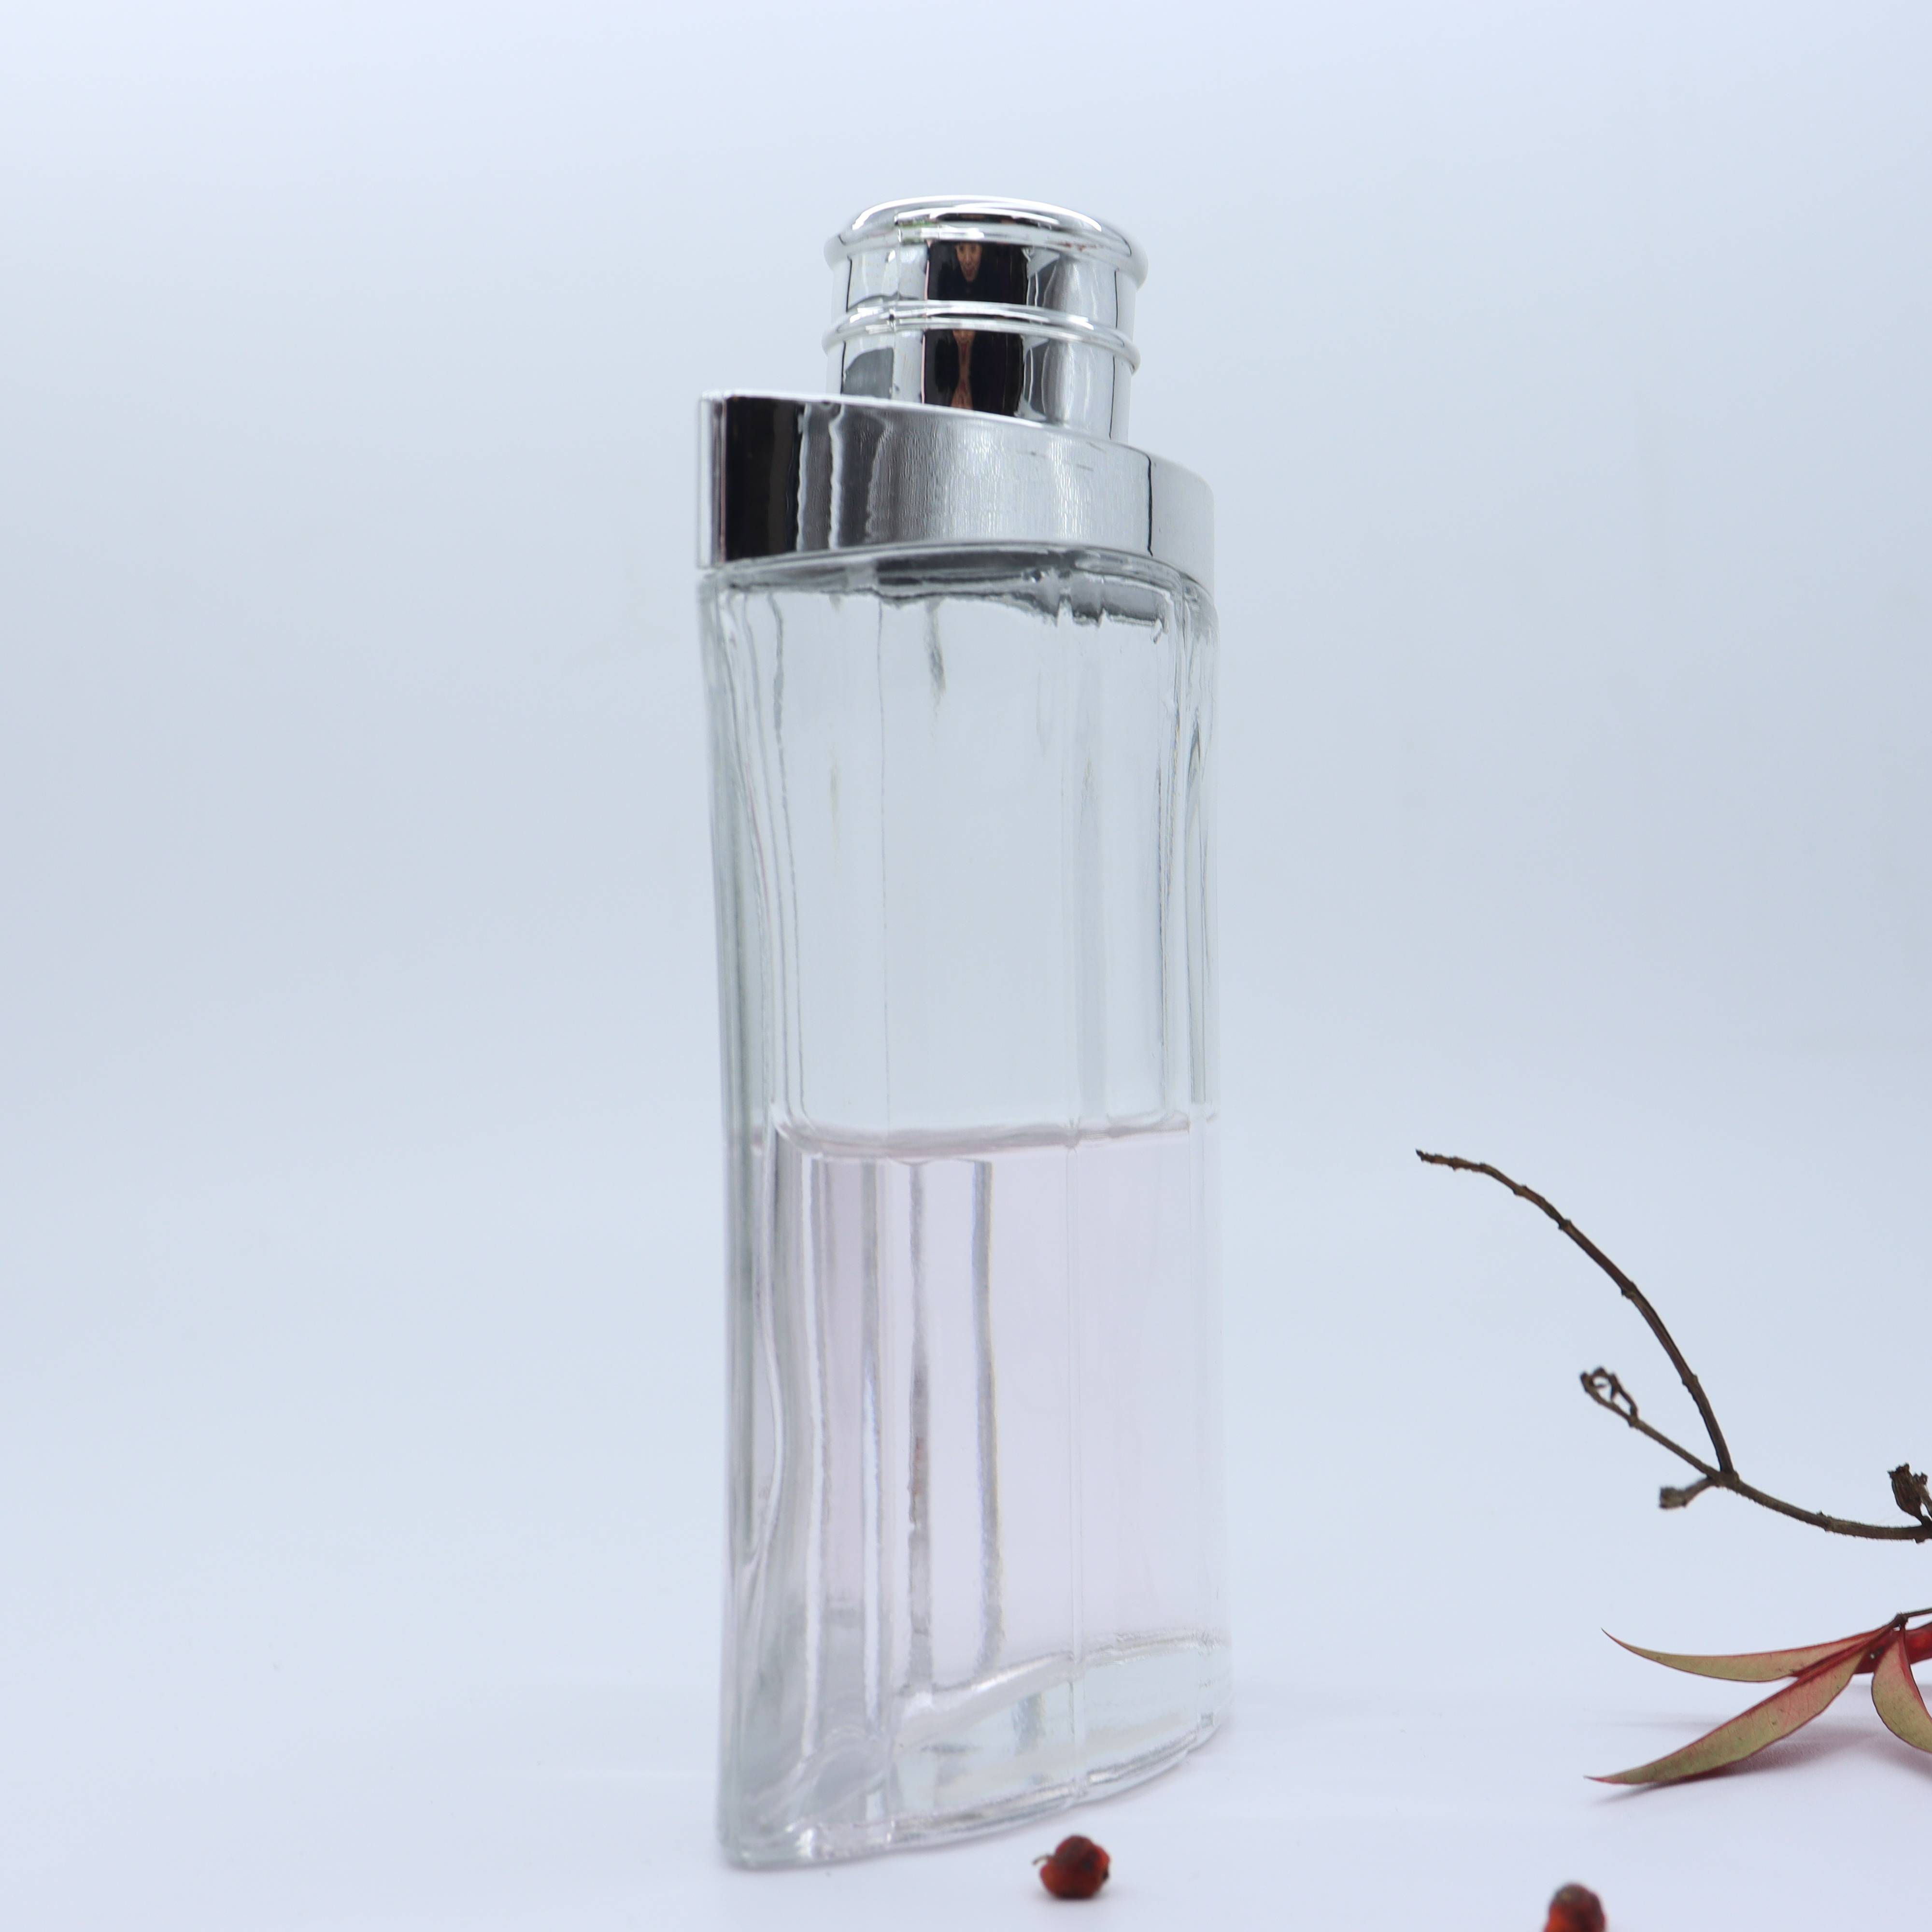 Wholesale perfume empty glass bottle hot new products 2021 Cute designed with pump spray